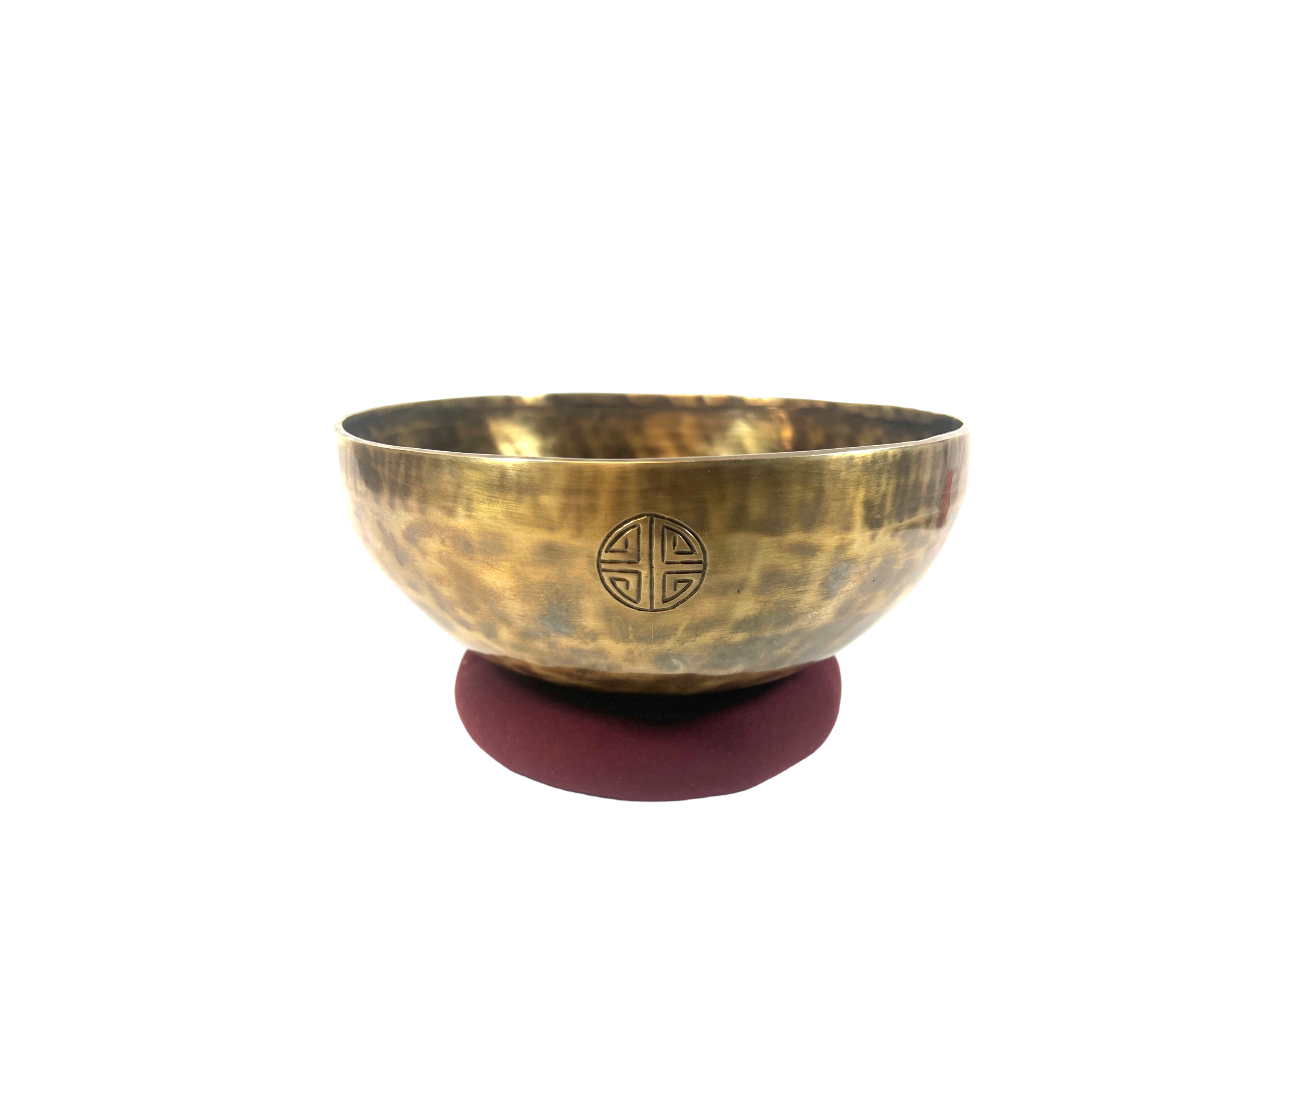 Common Pitfalls when Shopping for an Authentic Singing Bowl